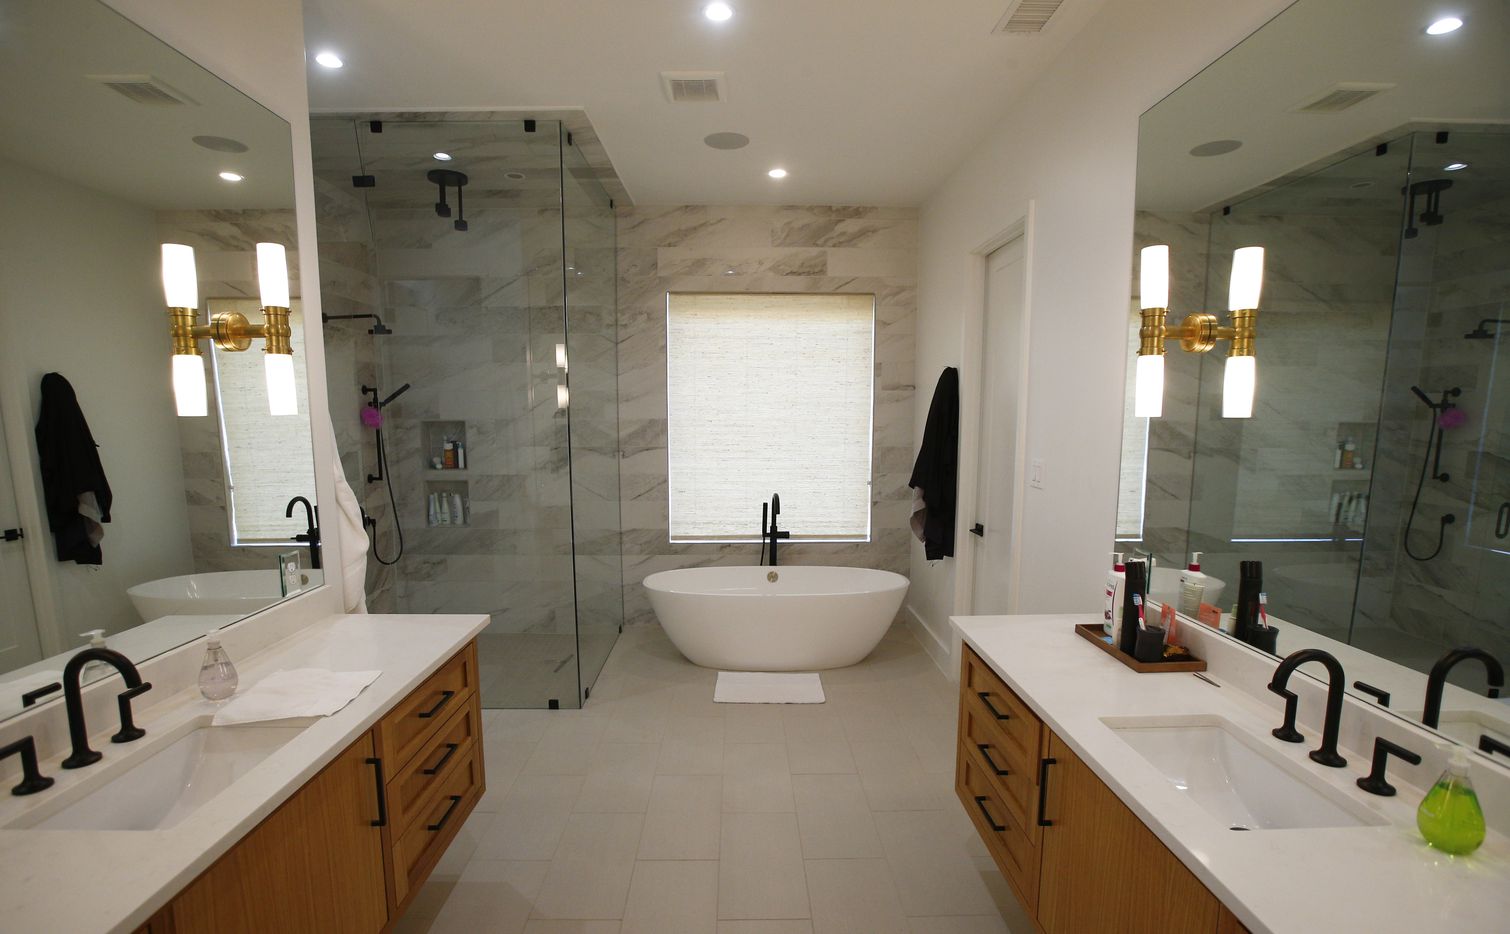 A bathroom in one of the new Centre Living Homes near Highland Park.